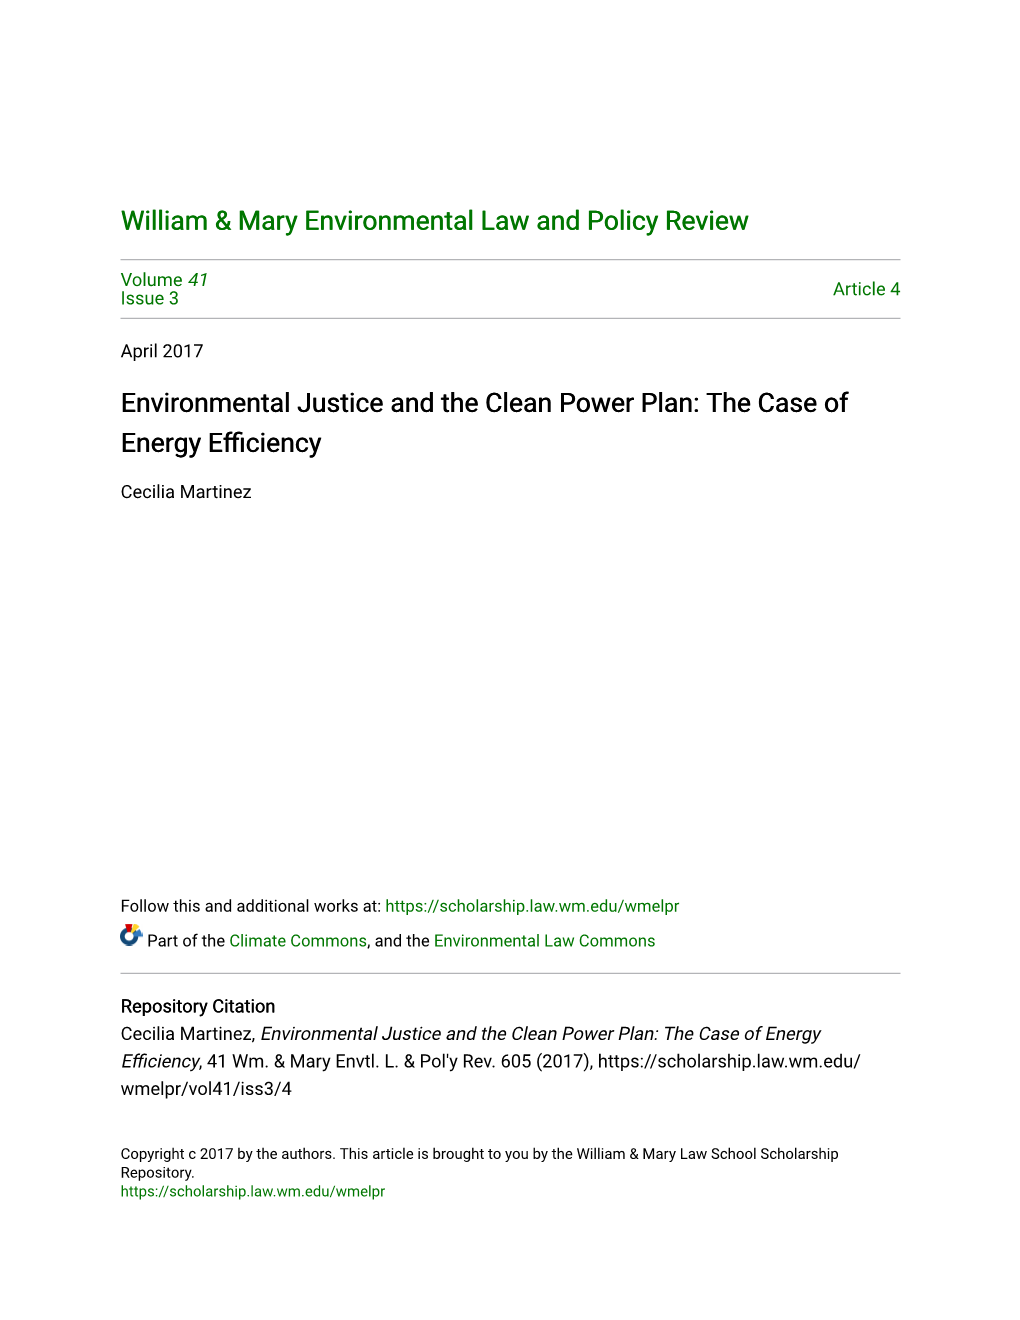 Environmental Justice and the Clean Power Plan: the Case of Energy Efficiency